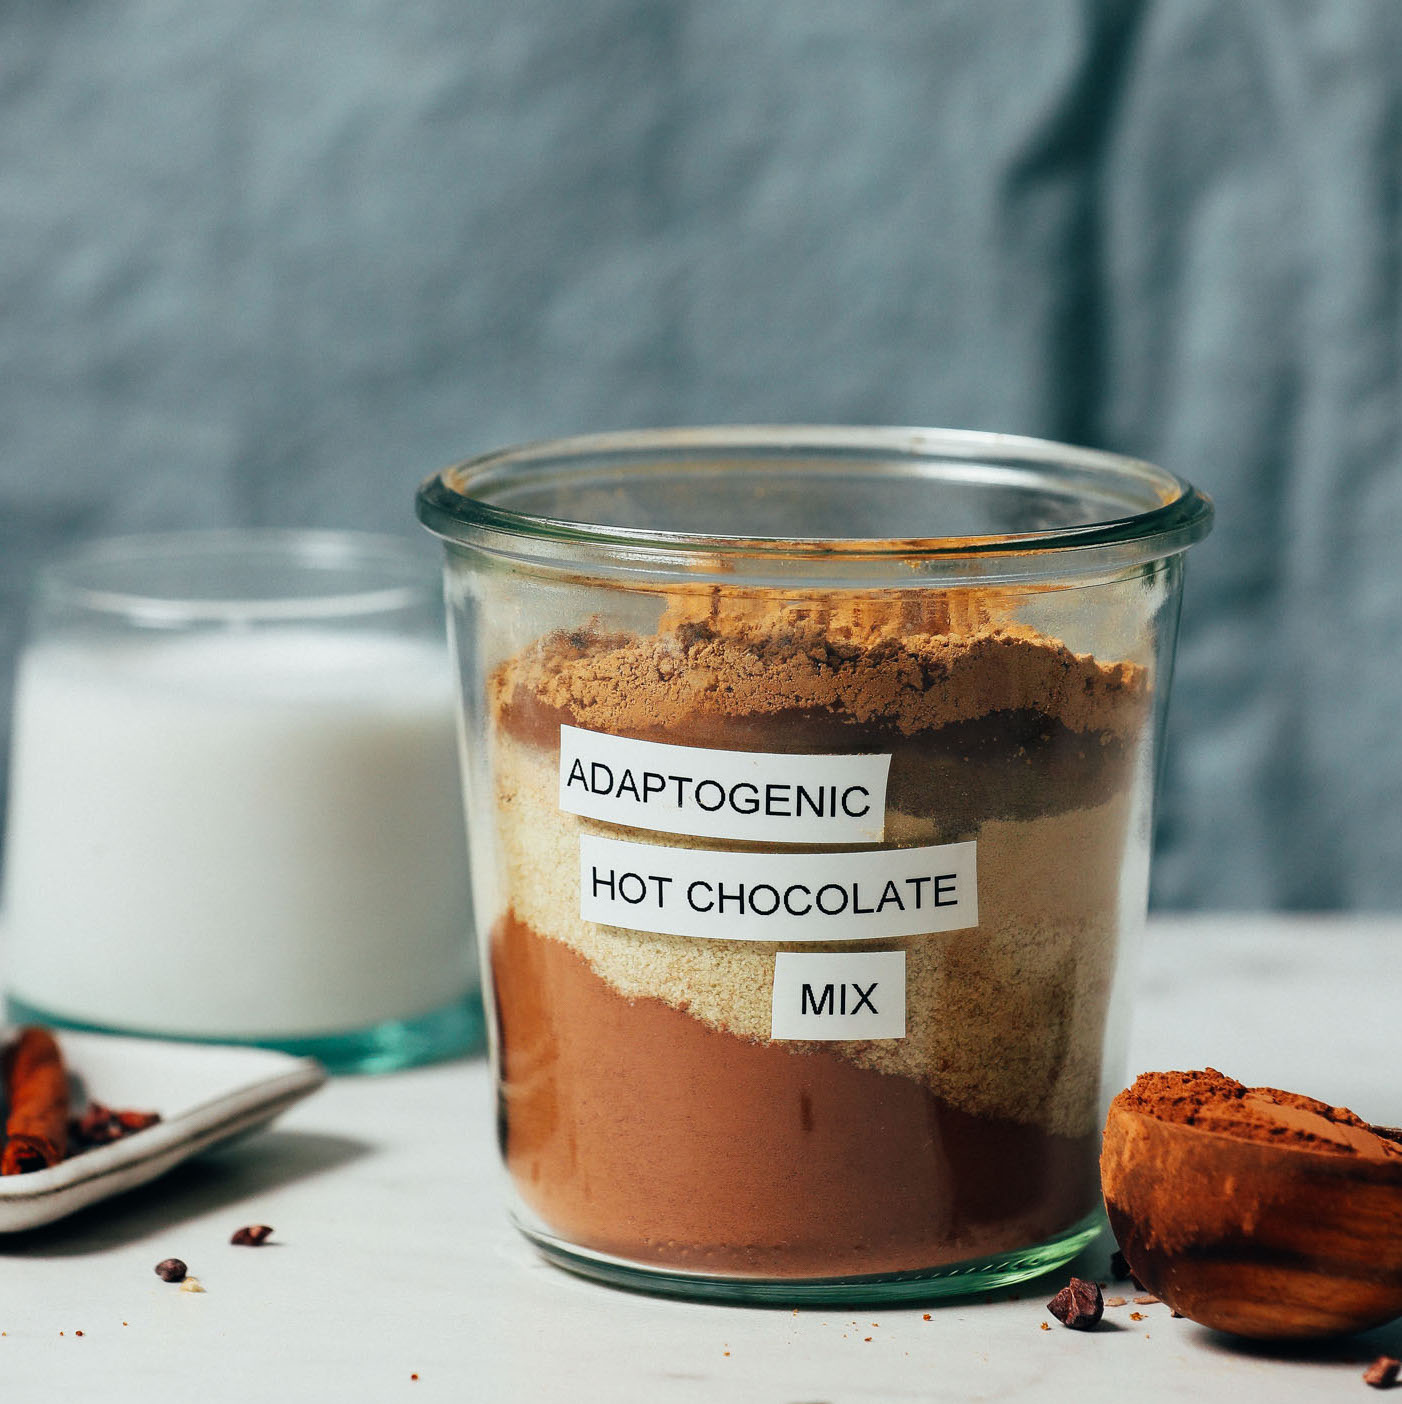 Jar of Adaptogenic Hot Chocolate Mix next to dairy-free milk and ingredients used to make it